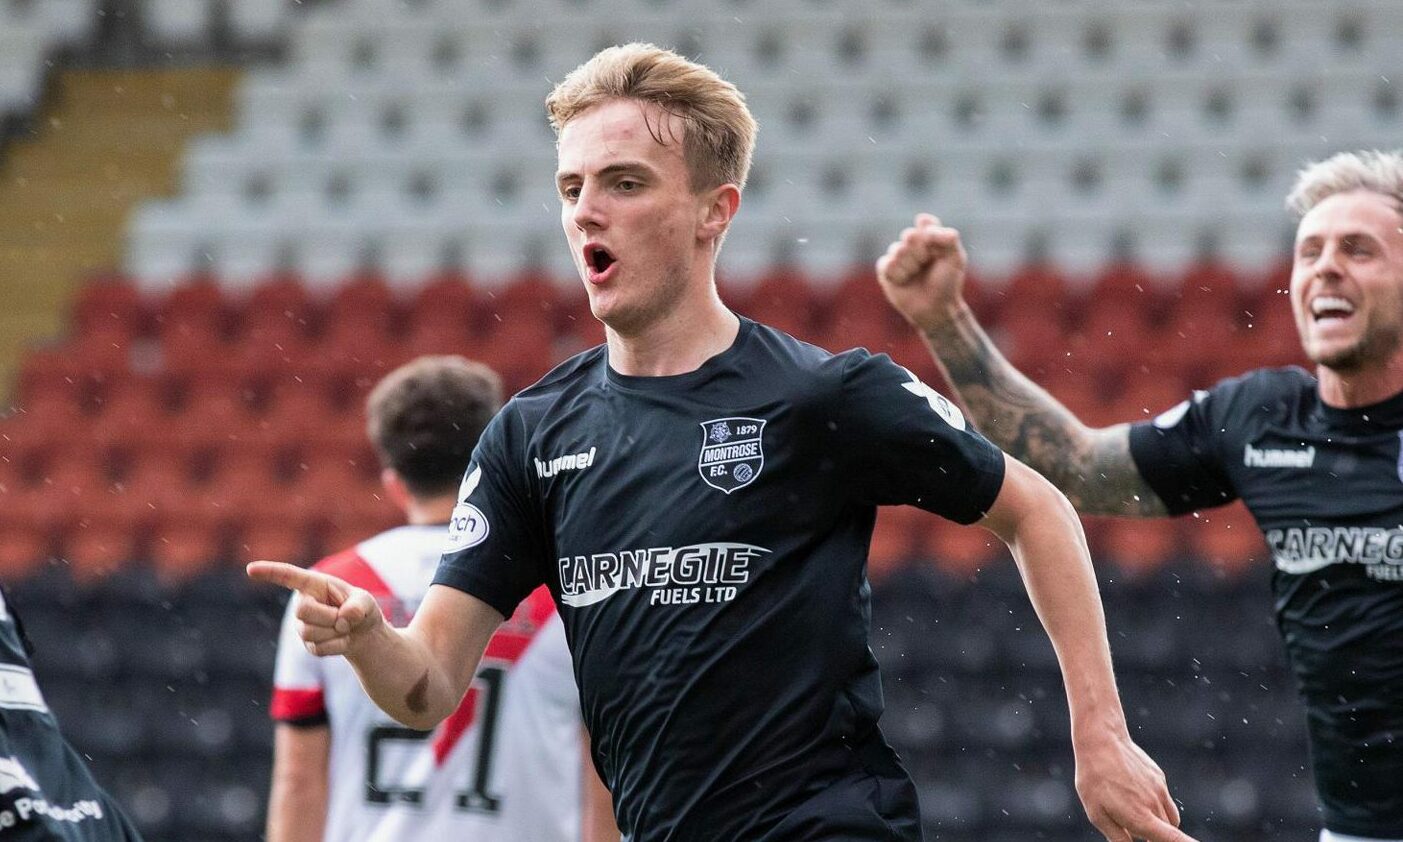 Cammy Ballantyne, pictured celebrating after scoring in last season's Championship play-offs, has rejoined Montrose on loan.